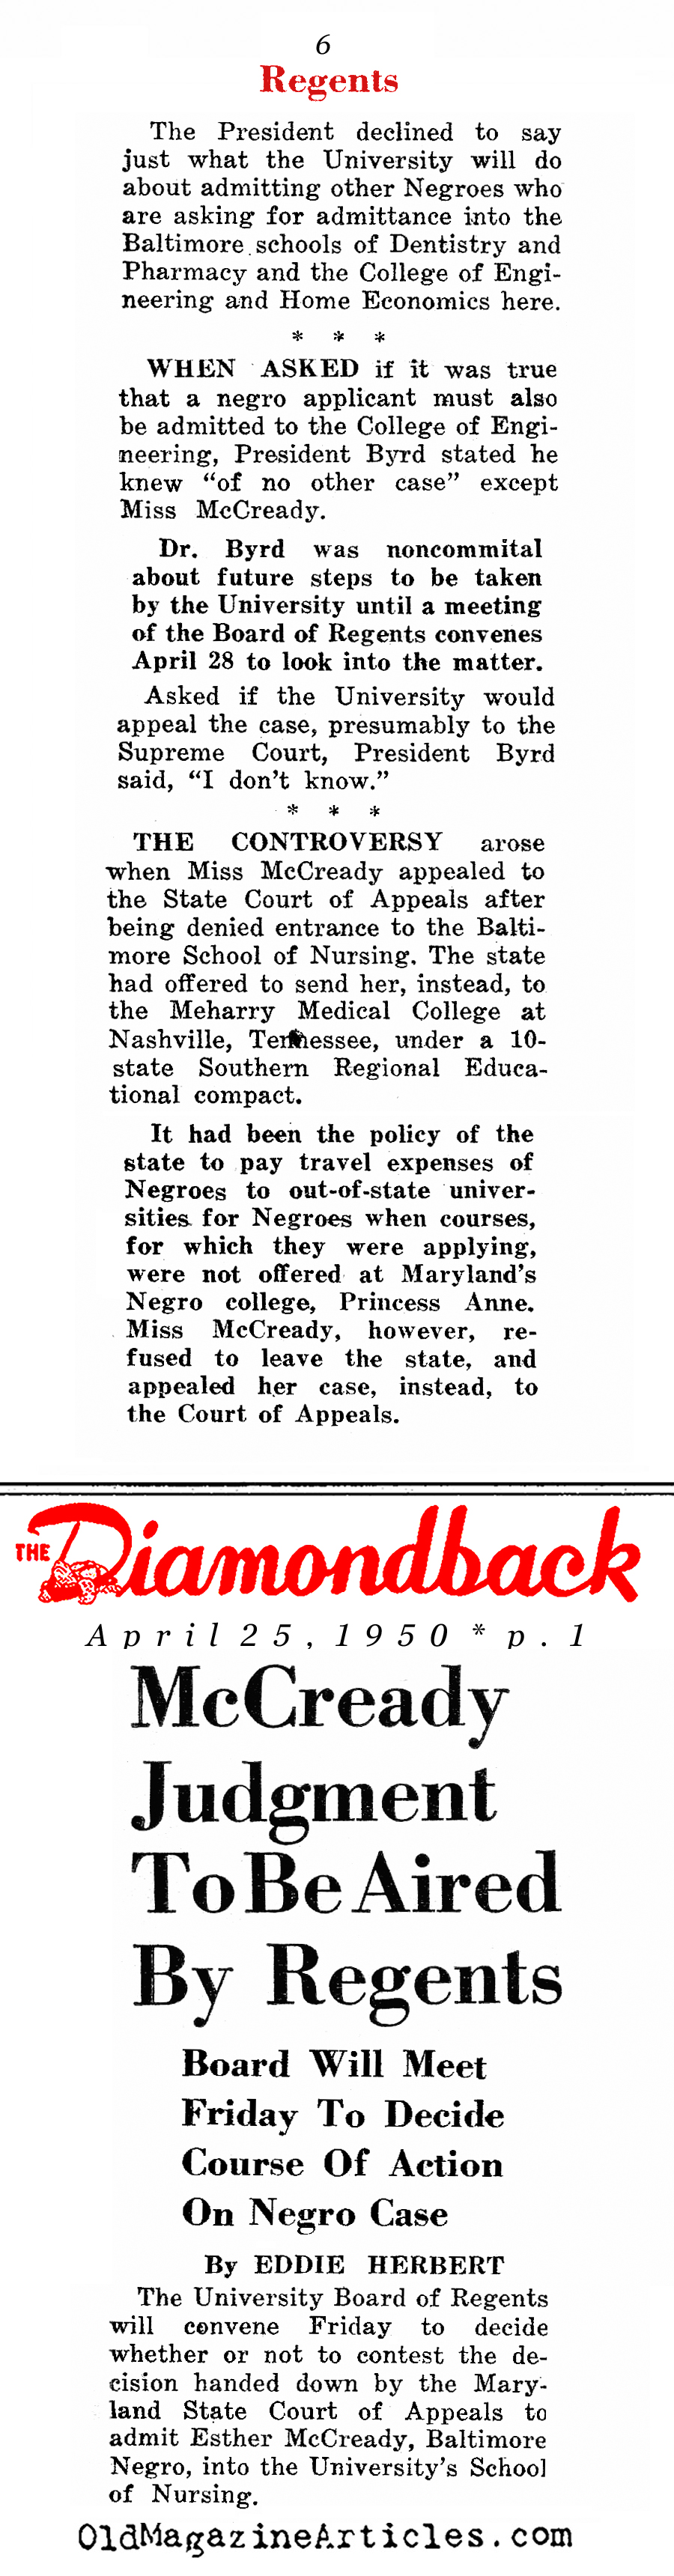 Racism in ''The Old Line State'' (The Diamond Back, 1950)